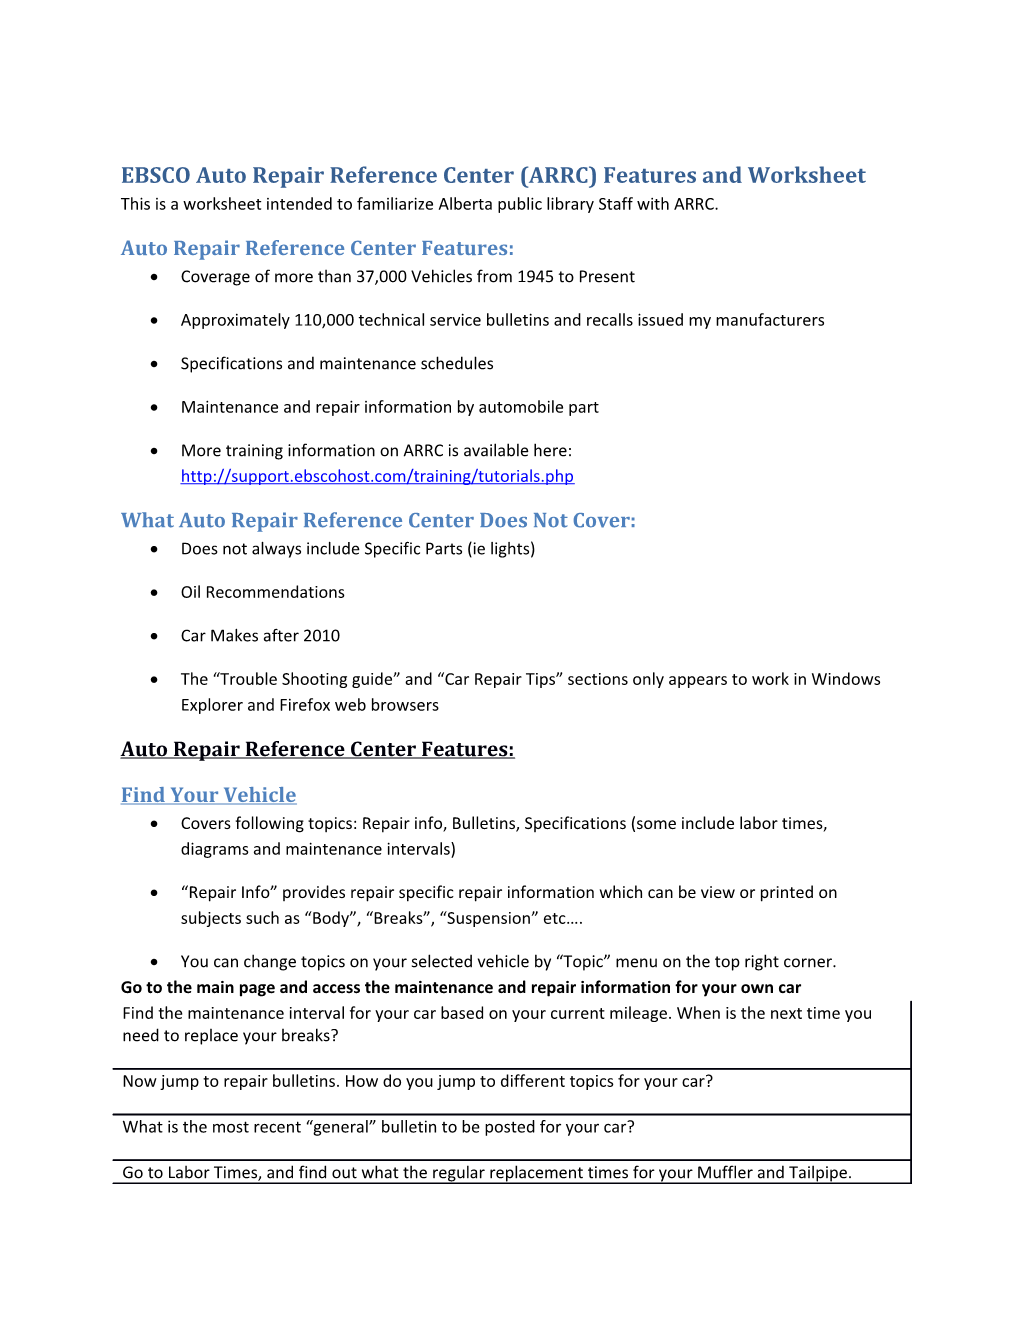 EBSCO Auto Repair Reference Center (ARRC) Features and Worksheet